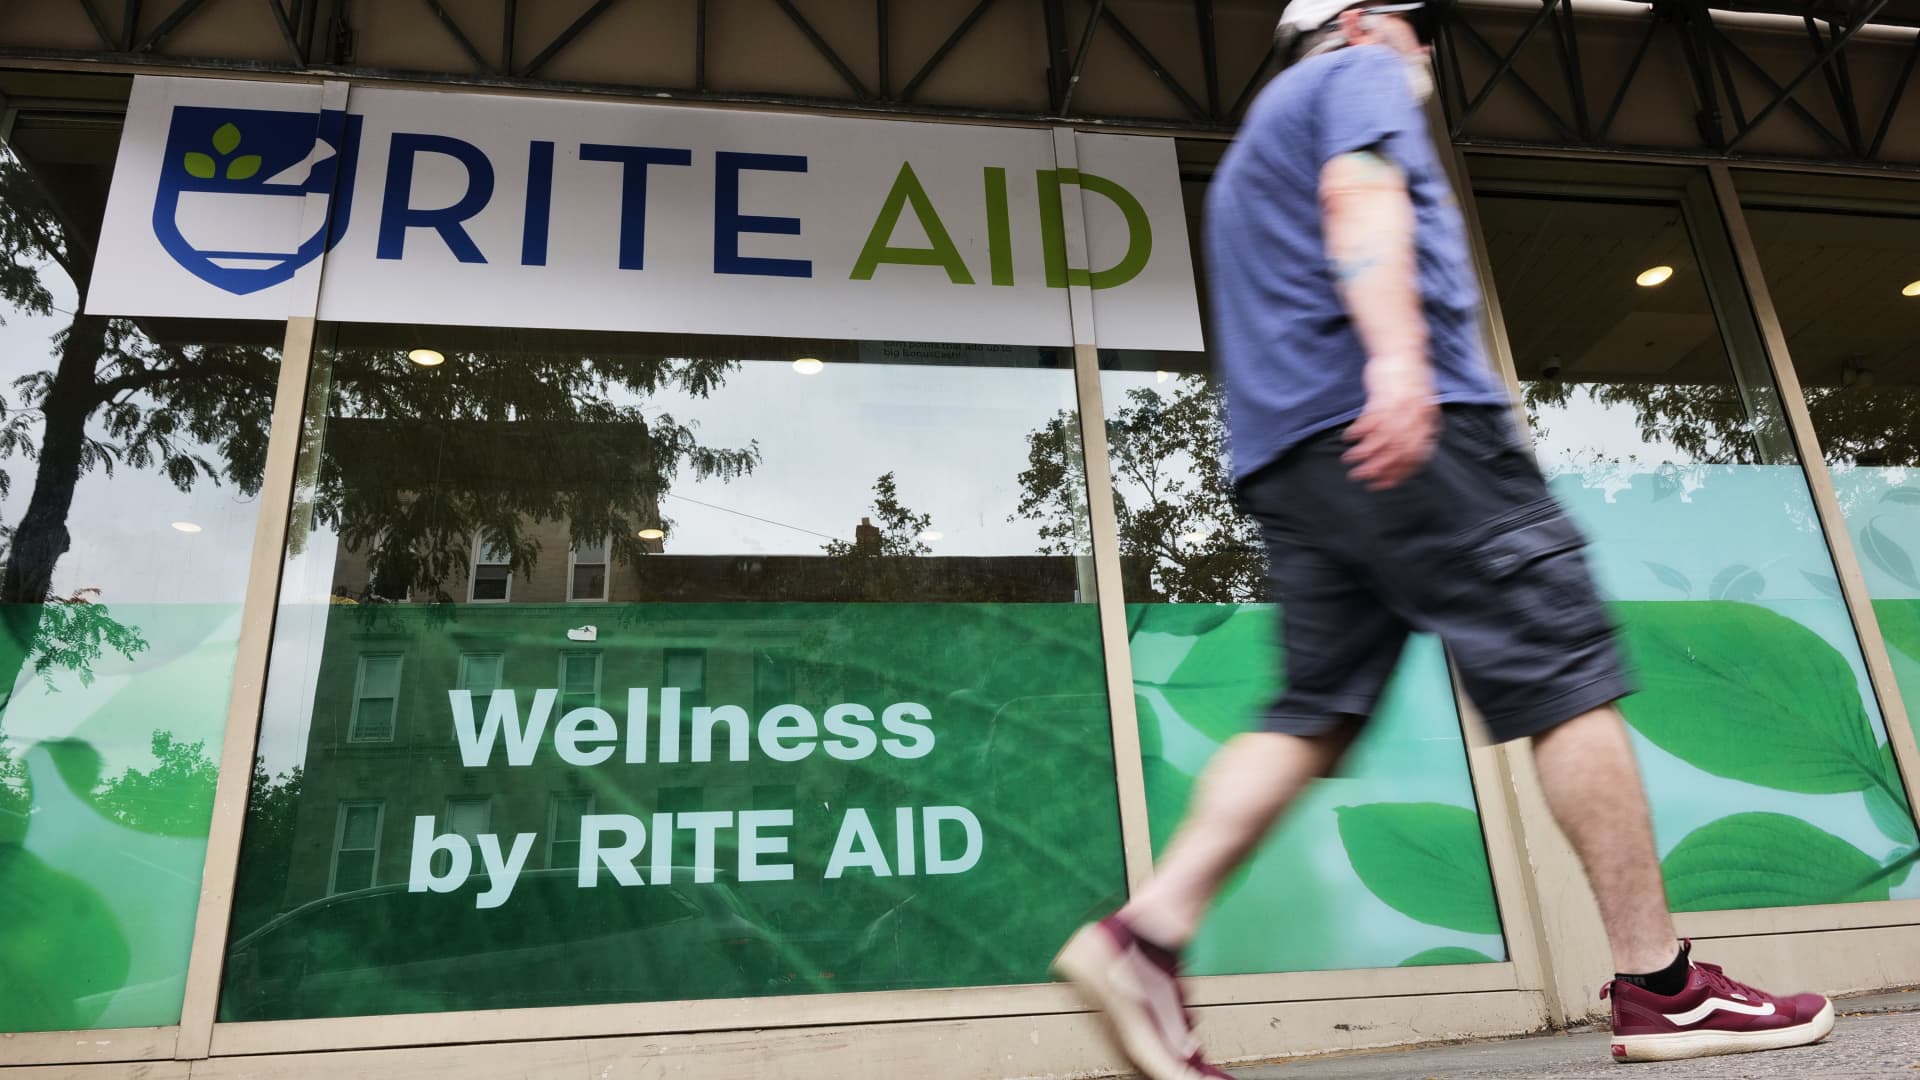 Rite Aid to be barred from using facial recognition under proposed FTC settlement